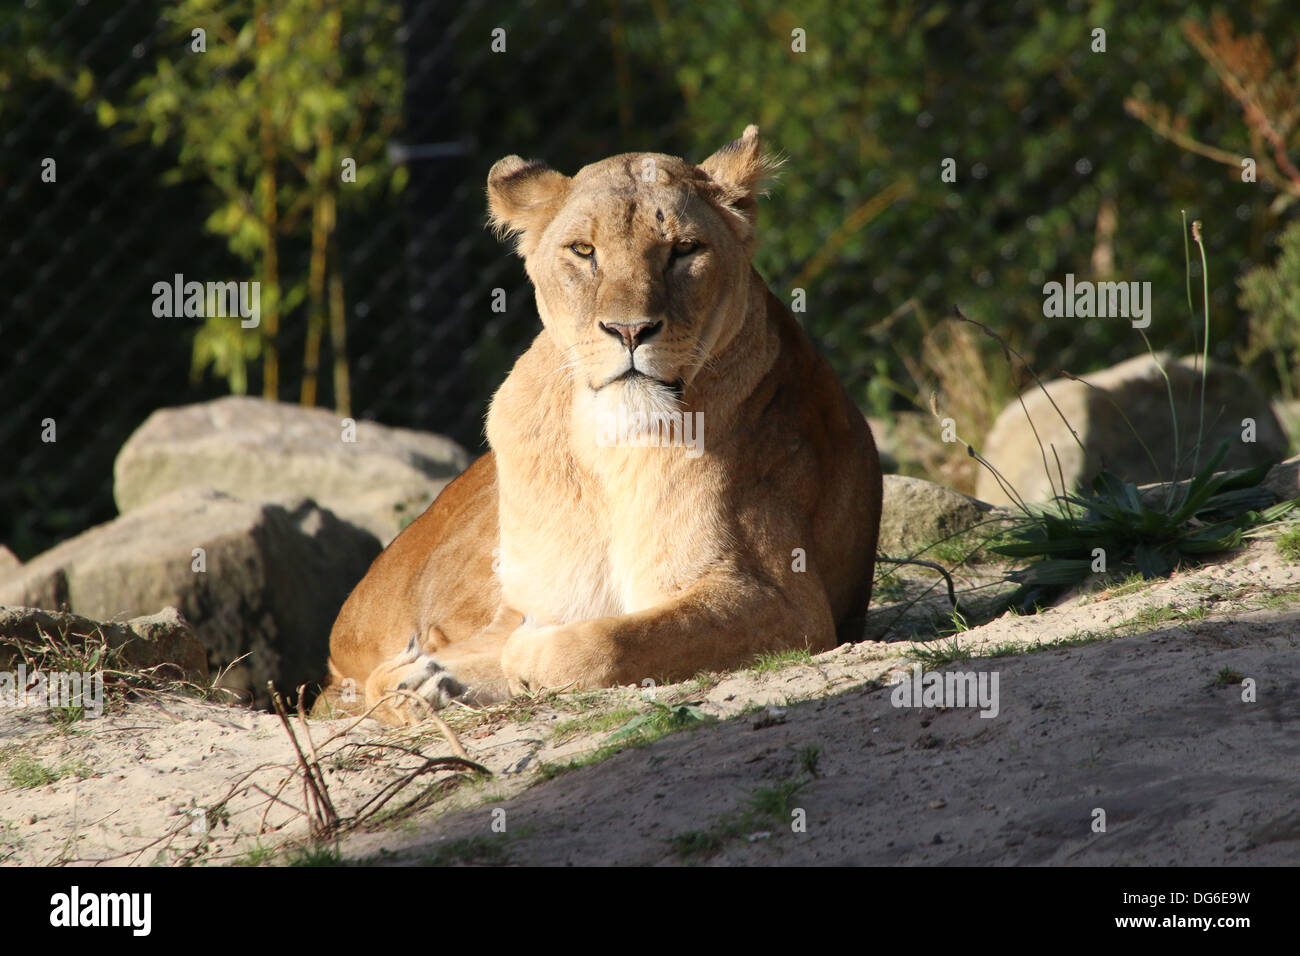 Close-up of a mature lioness (Panthera leo) in zoo setting Stock Photo